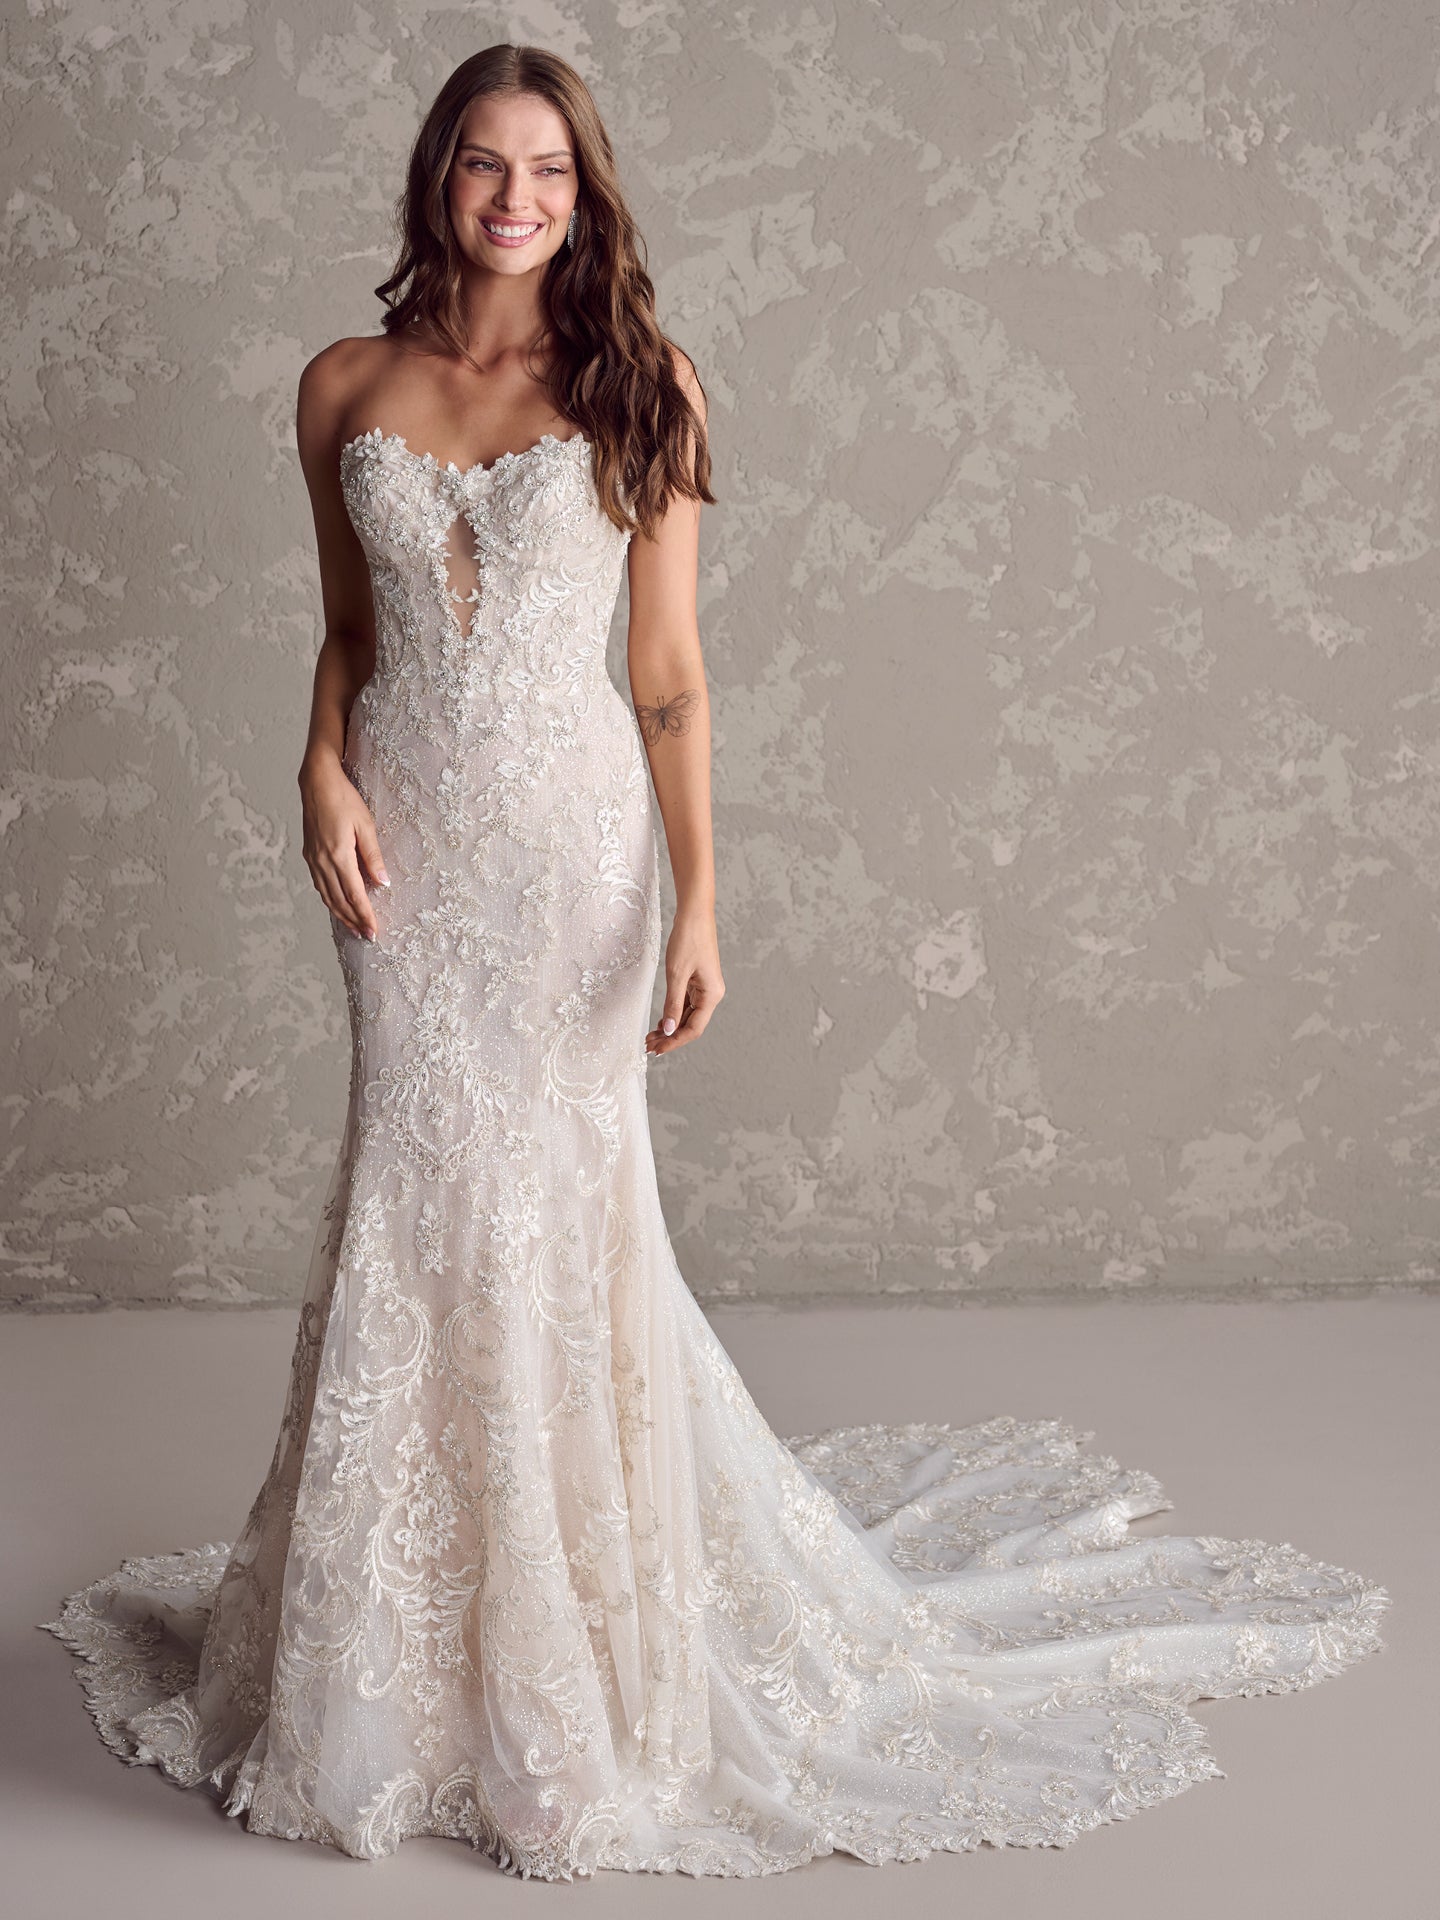 Romantic Off-the-Shoulder Fit-and-Flare Gown by Maggie Sottero - Image 1